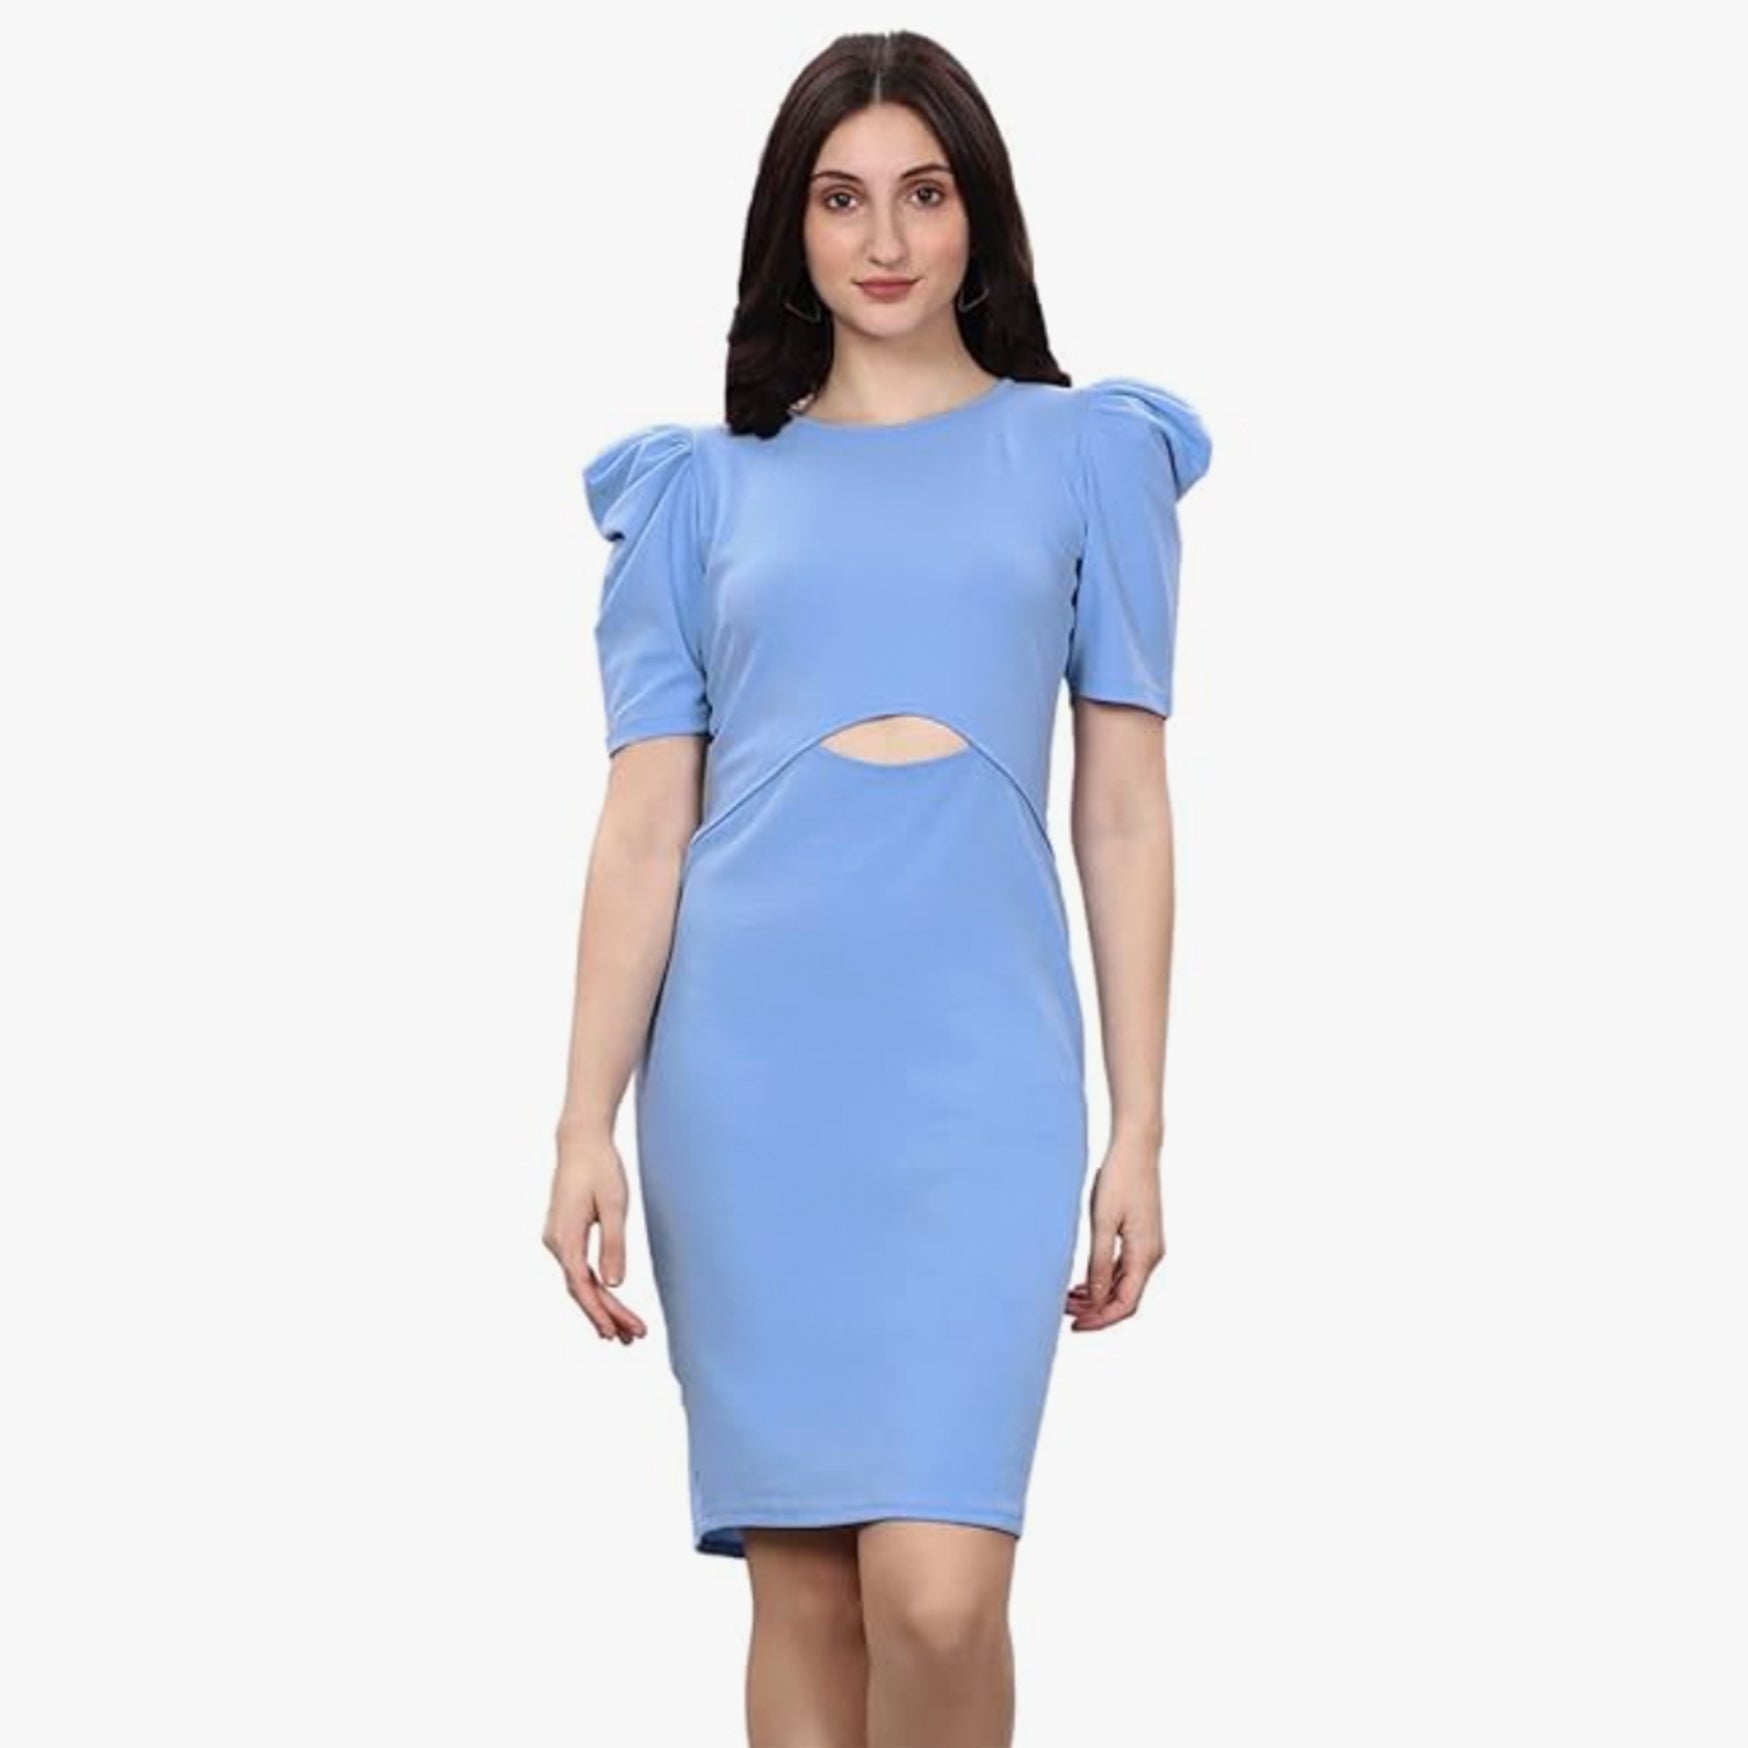 SIRIL Women's Knitted & Dyed A-Line Lycra Dress(332TK10053-L_Peacock Blue)